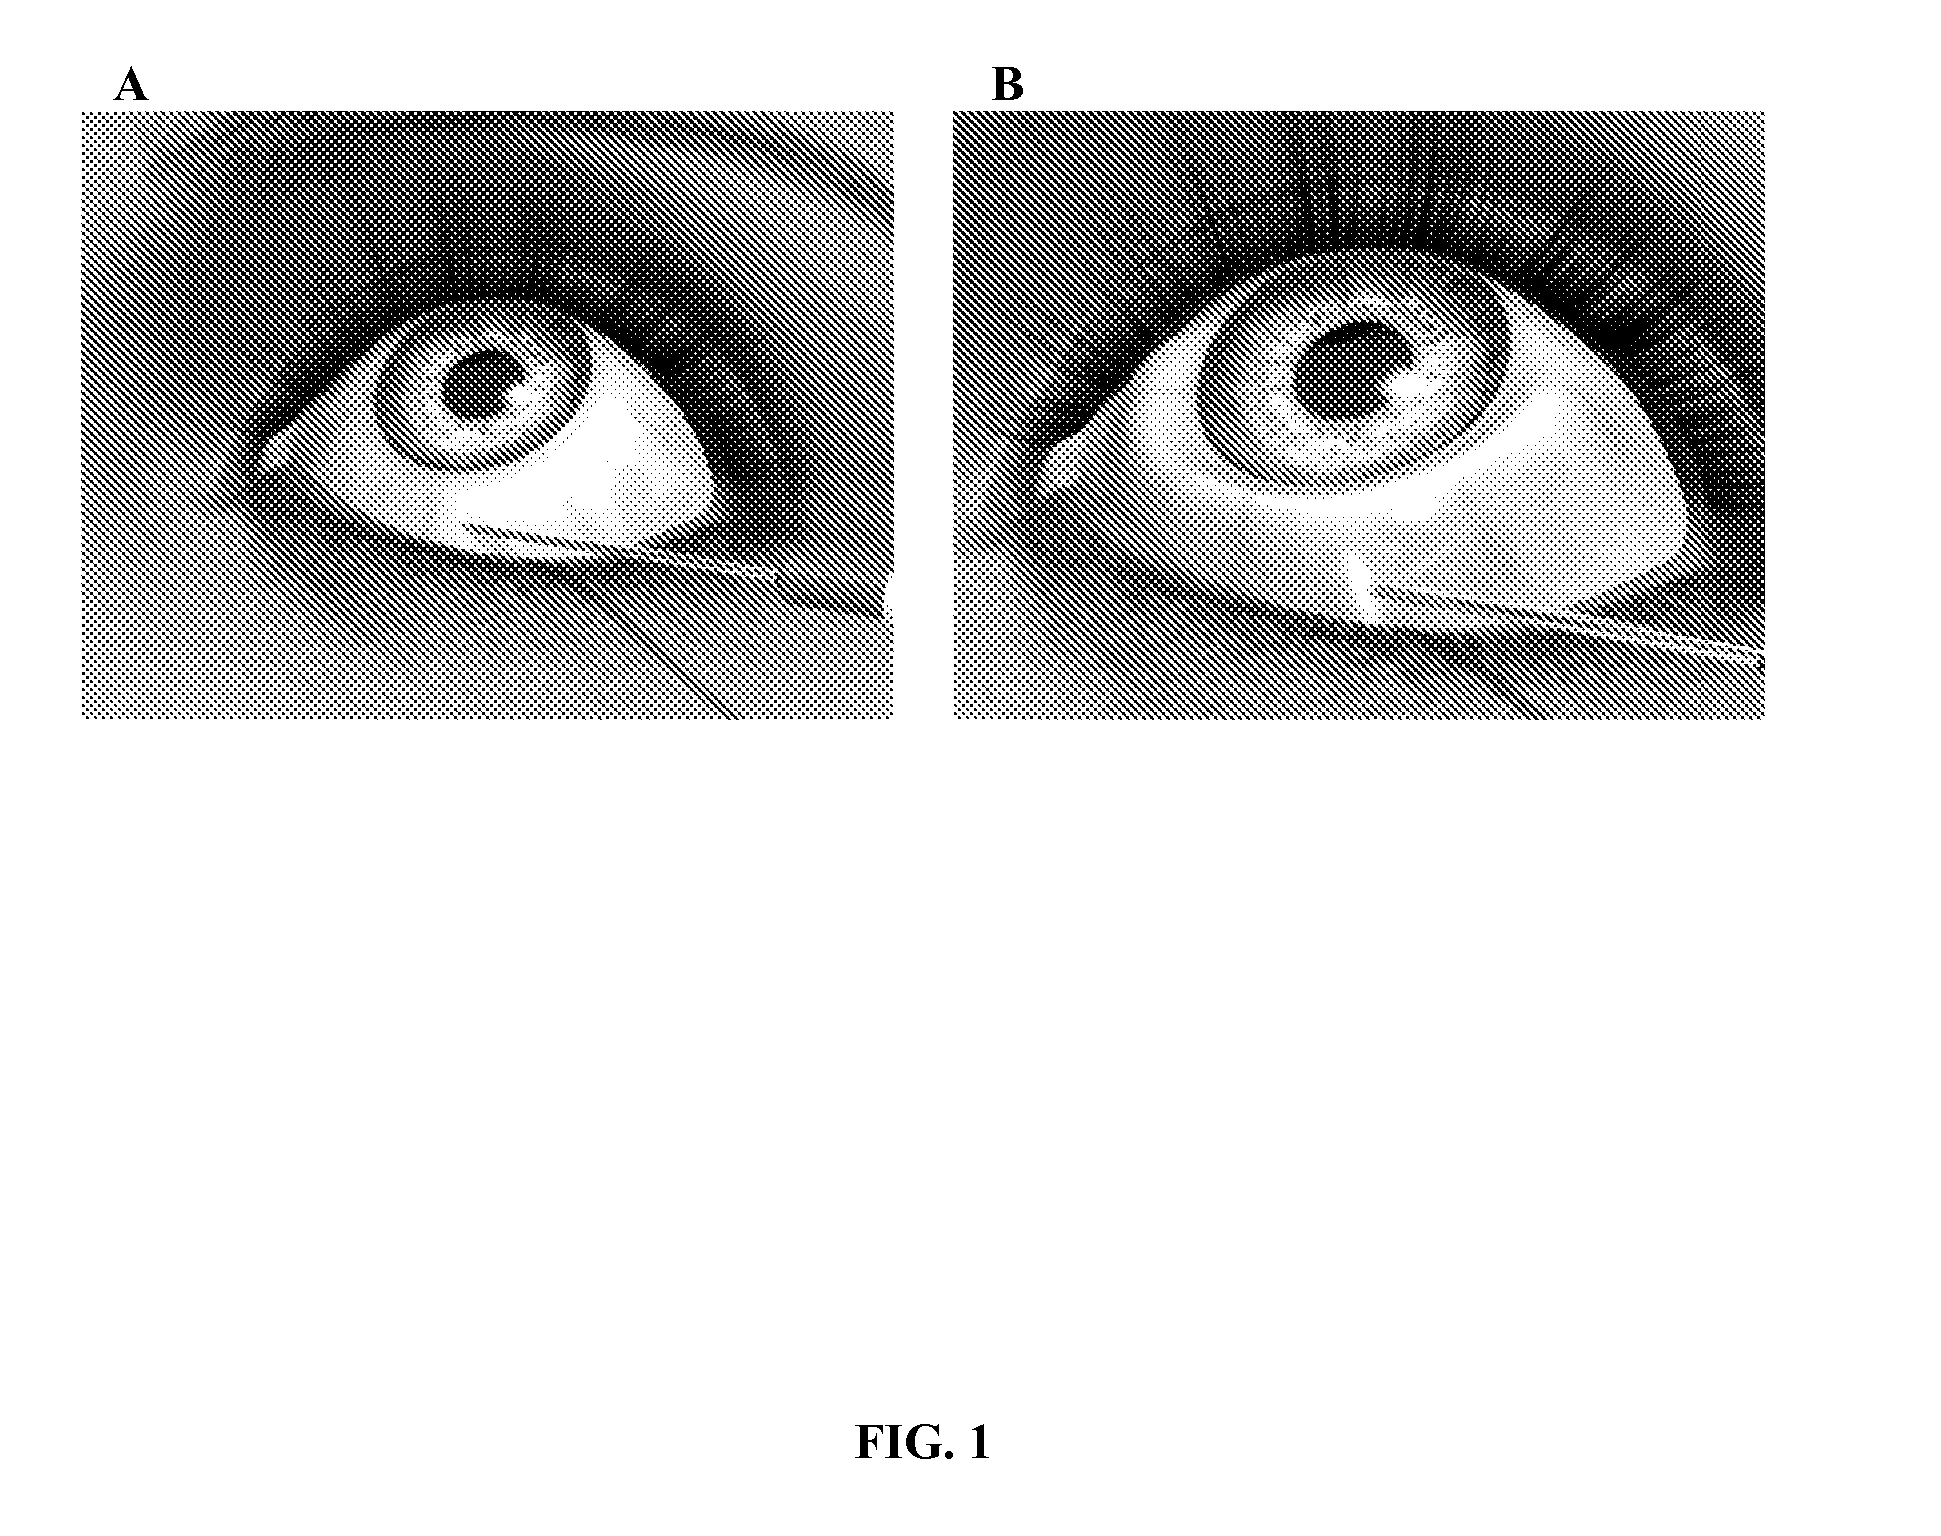 Method for treating primary and secondary forms of glaucoma